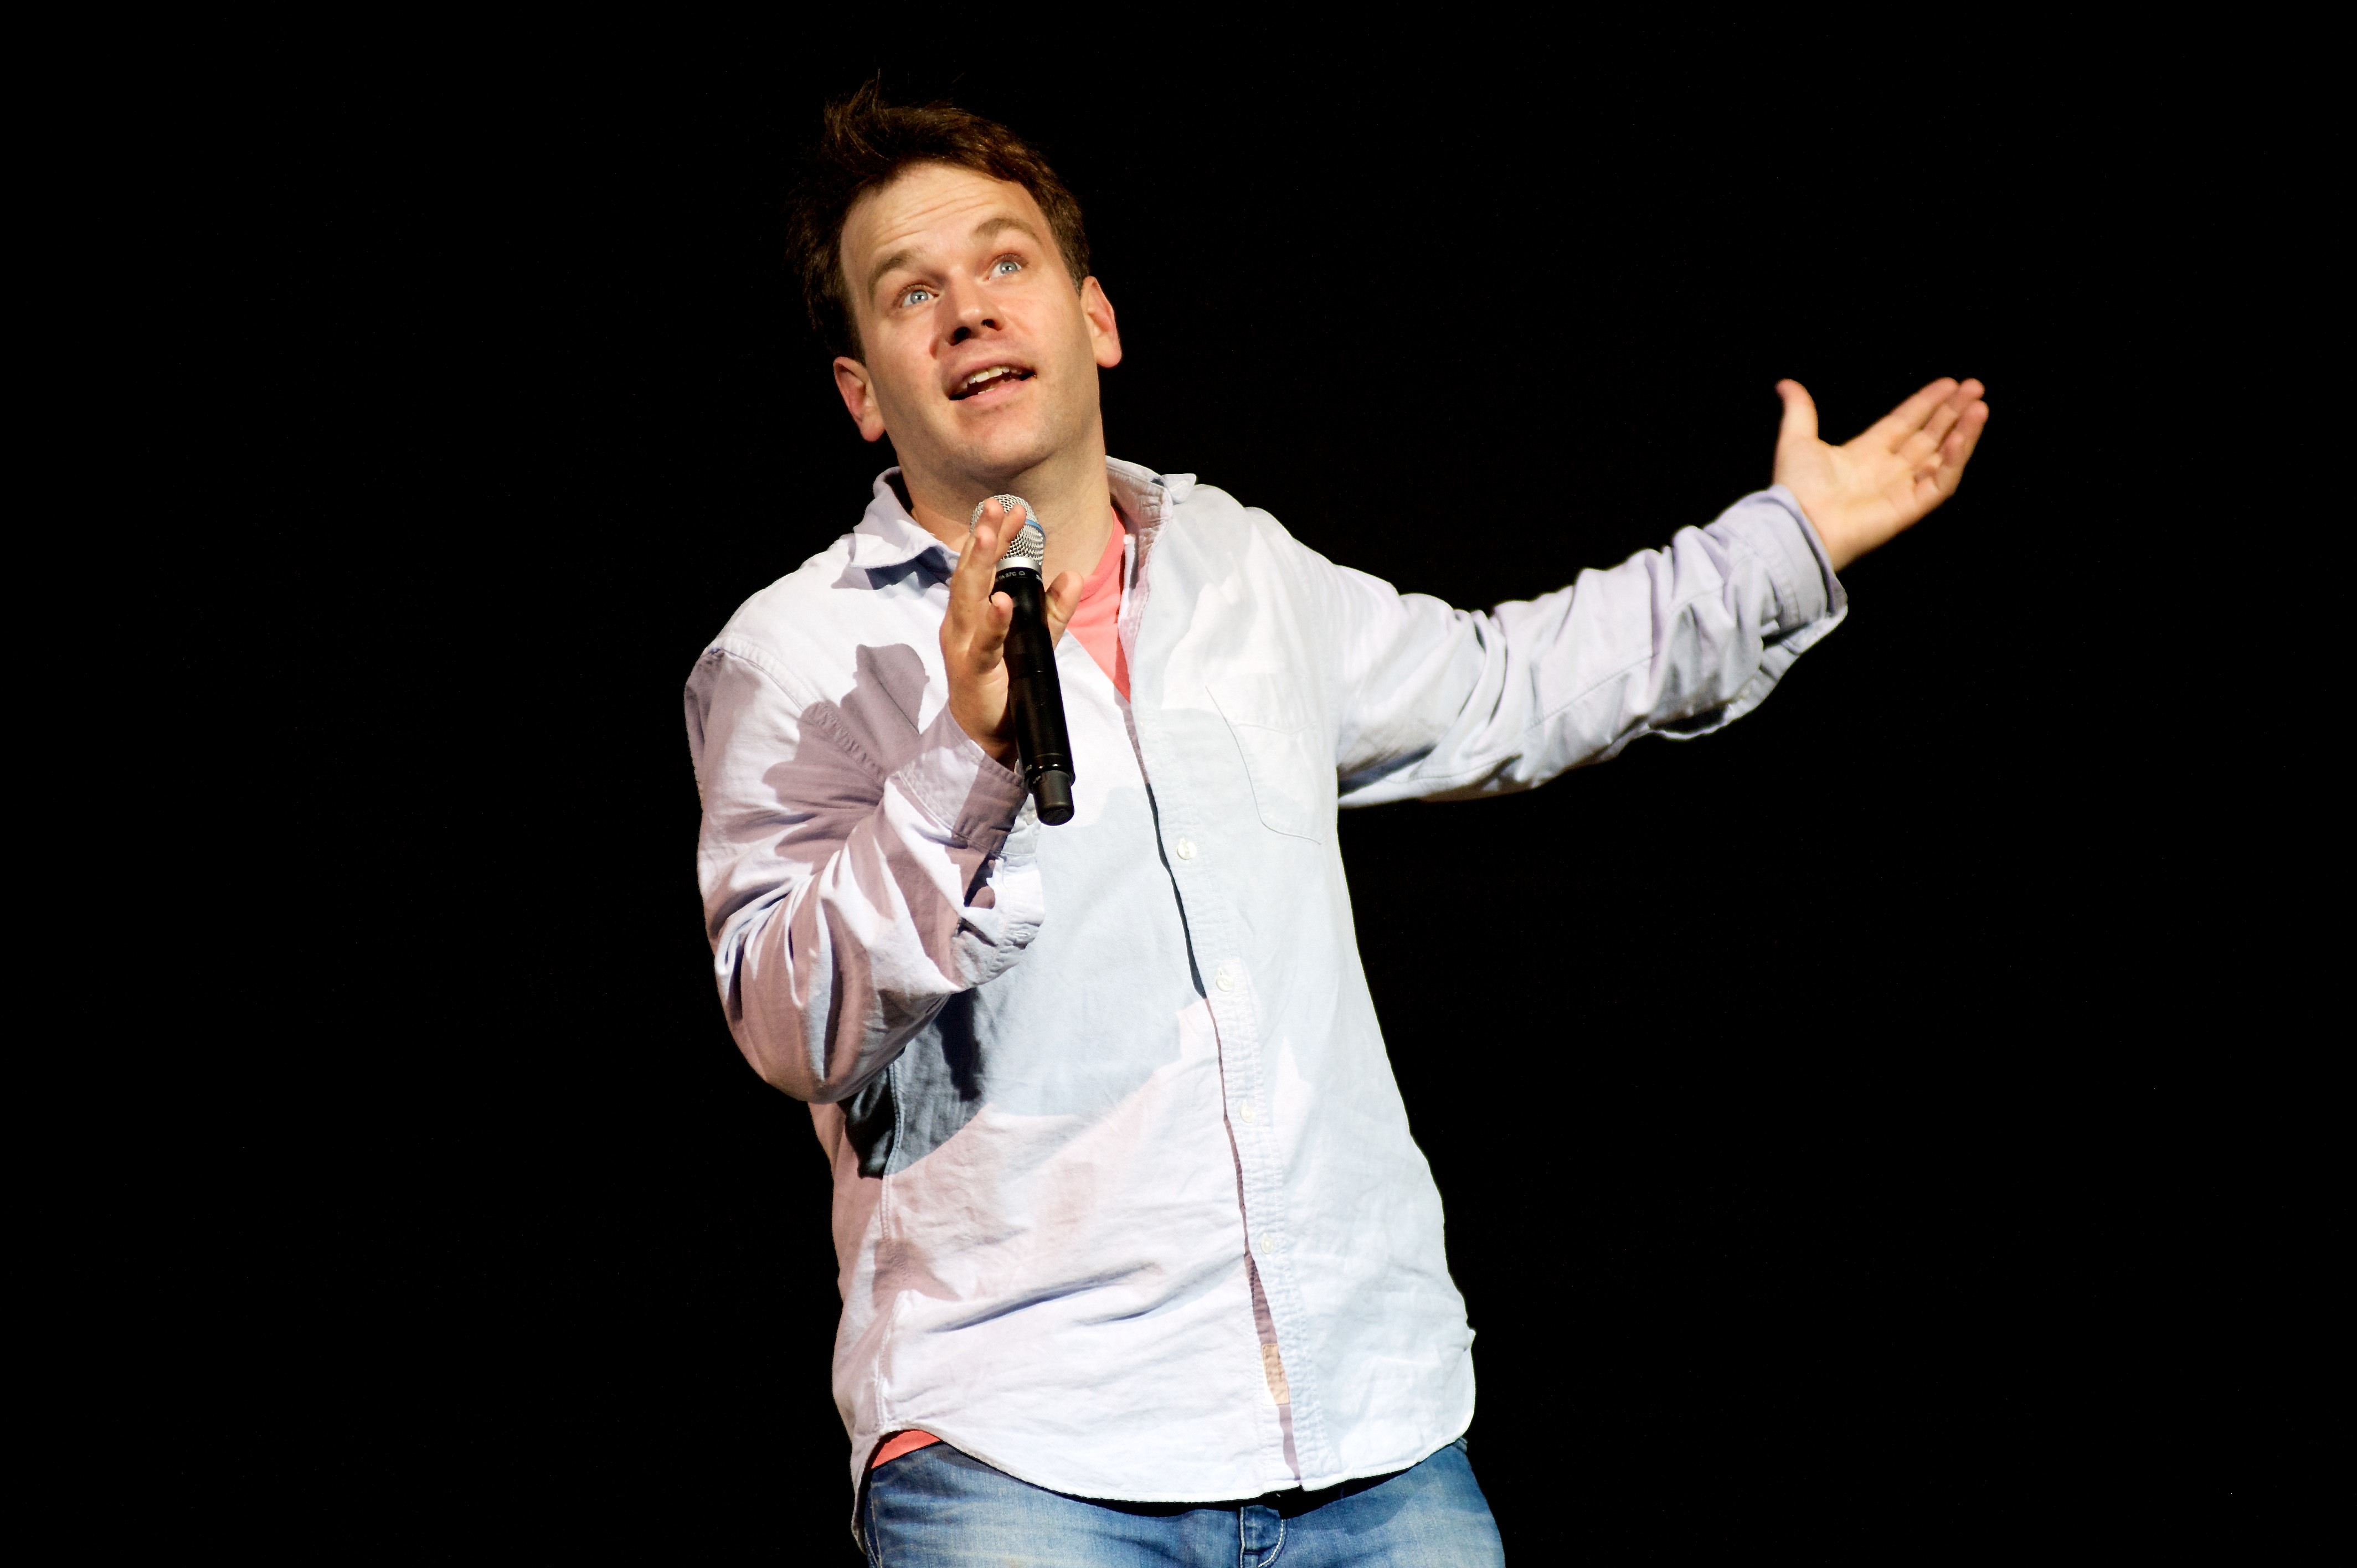 Mike Birbiglia Performing In Jeans and A Button Down Shirt